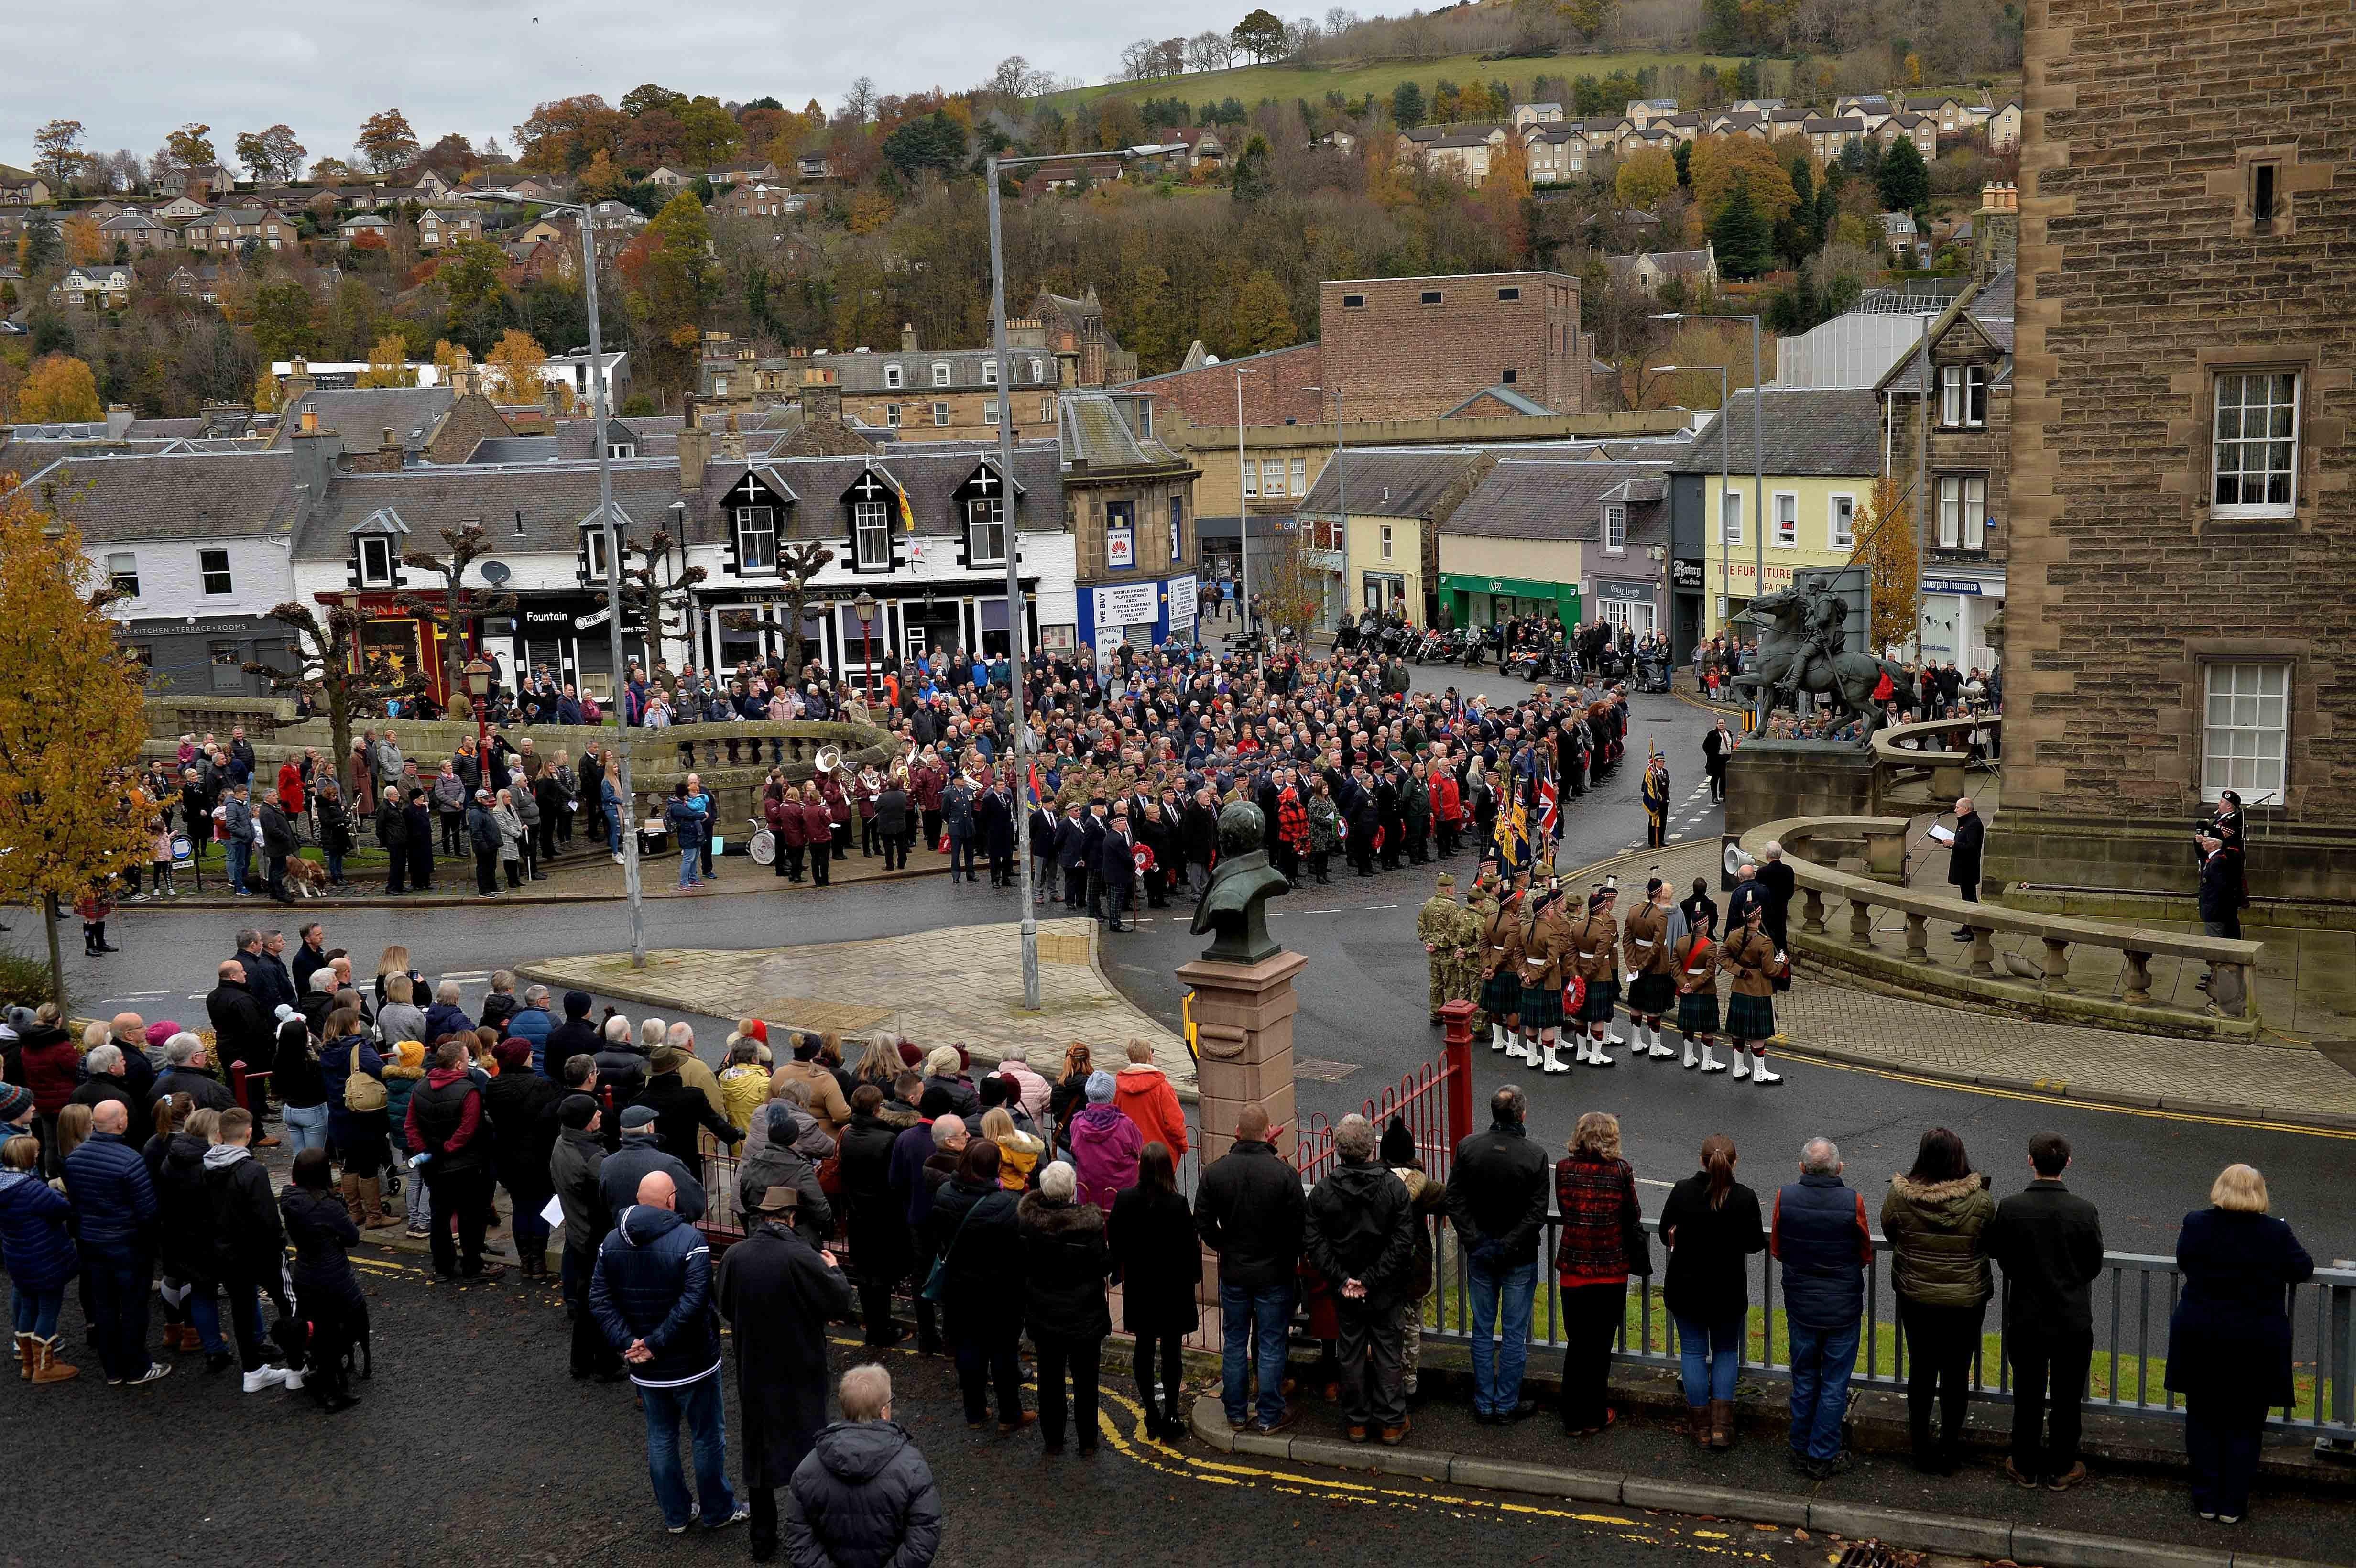 The act of remembrance in Galashiels.